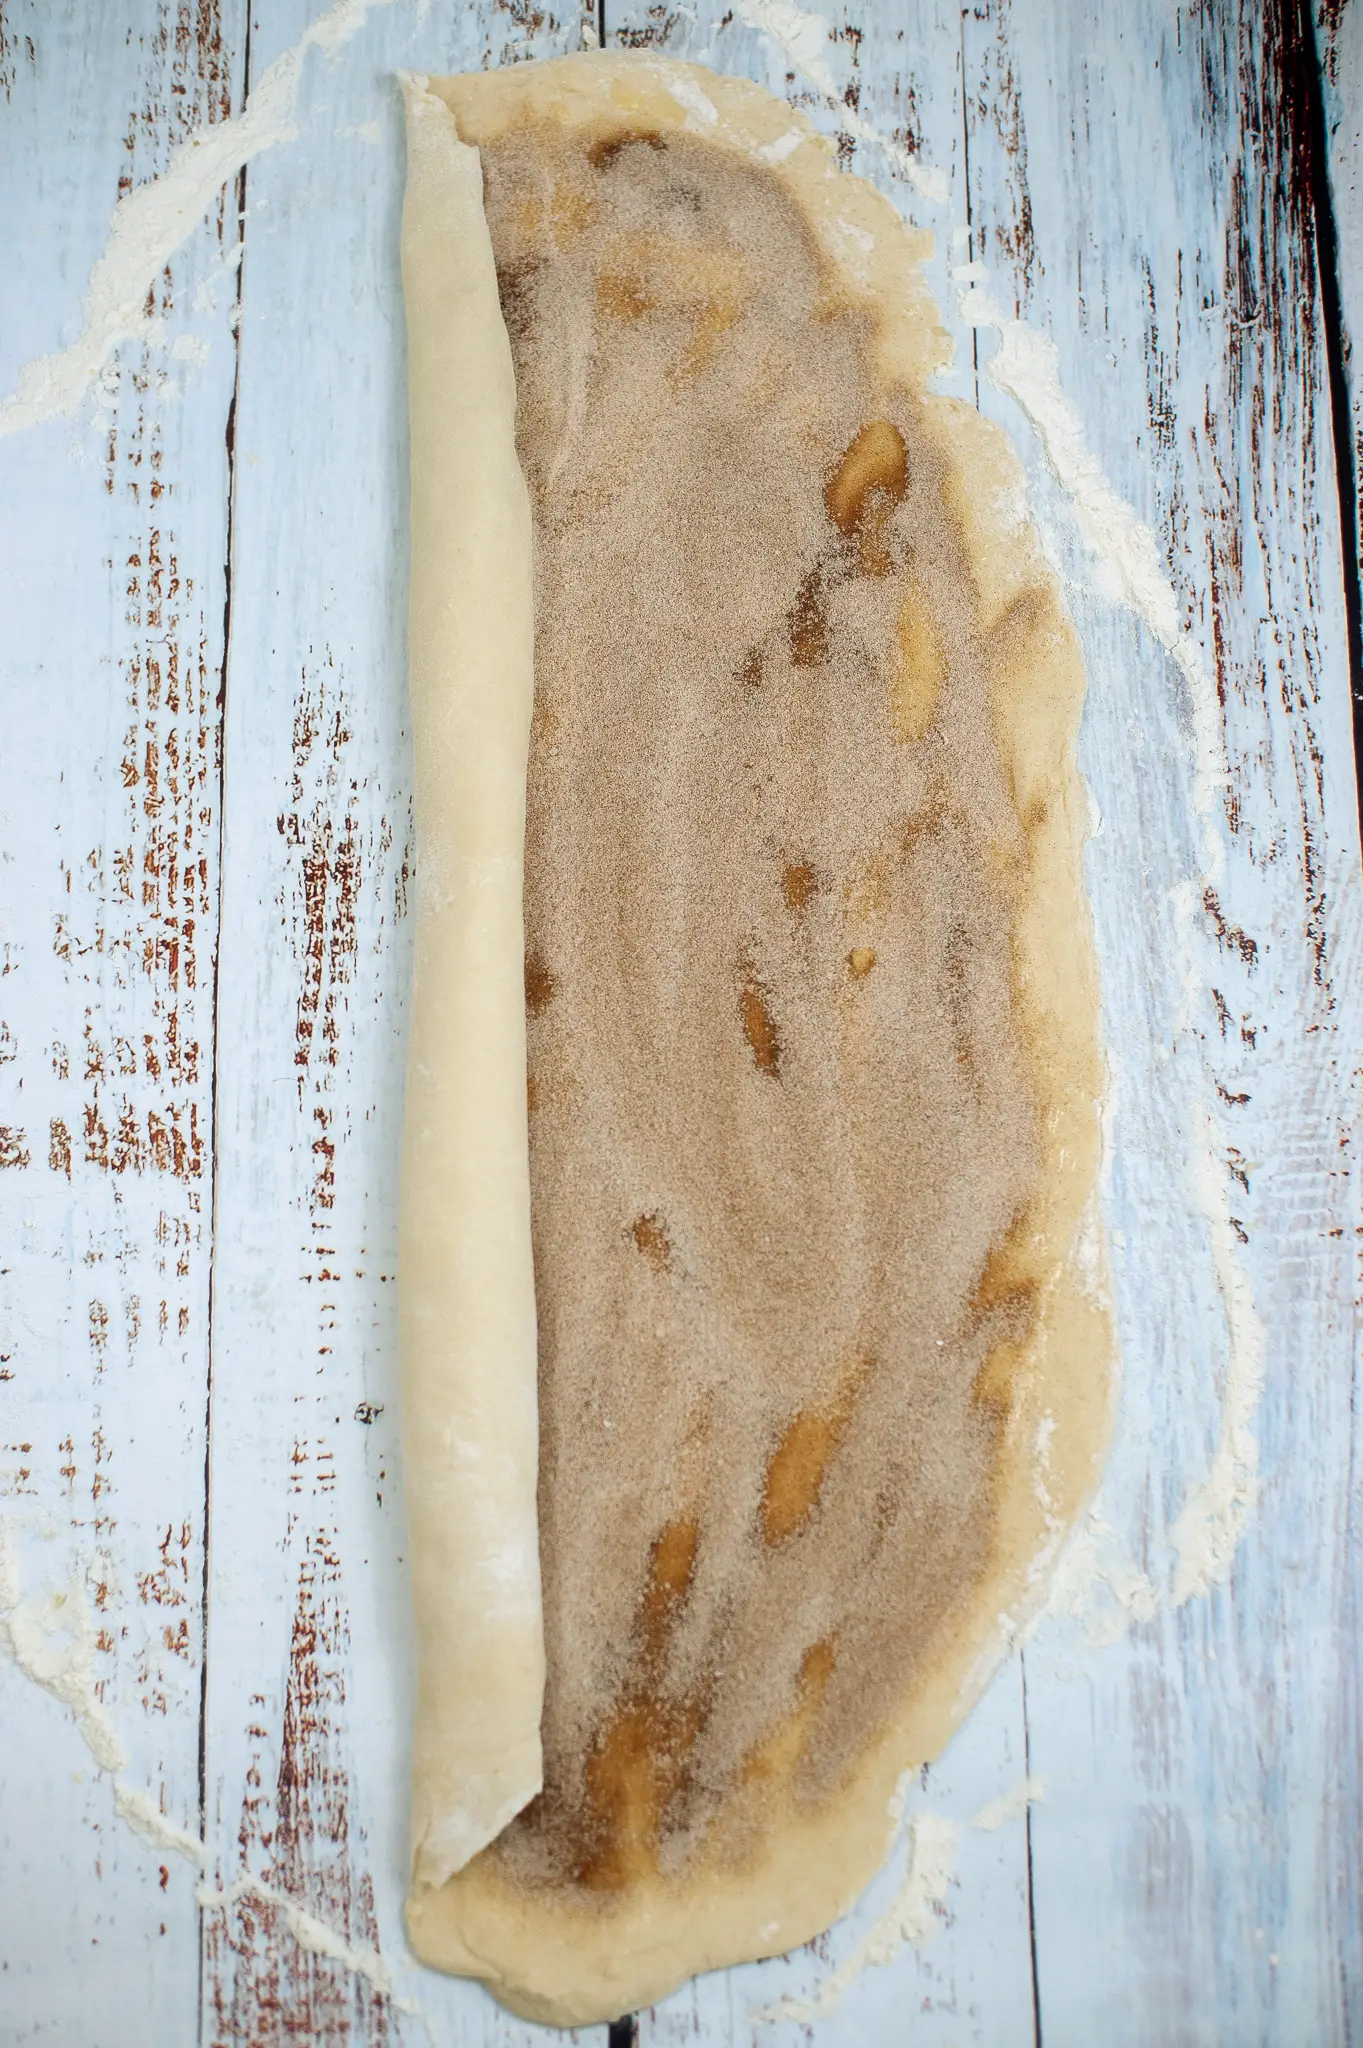 Cinnamon roll dough being rolled.